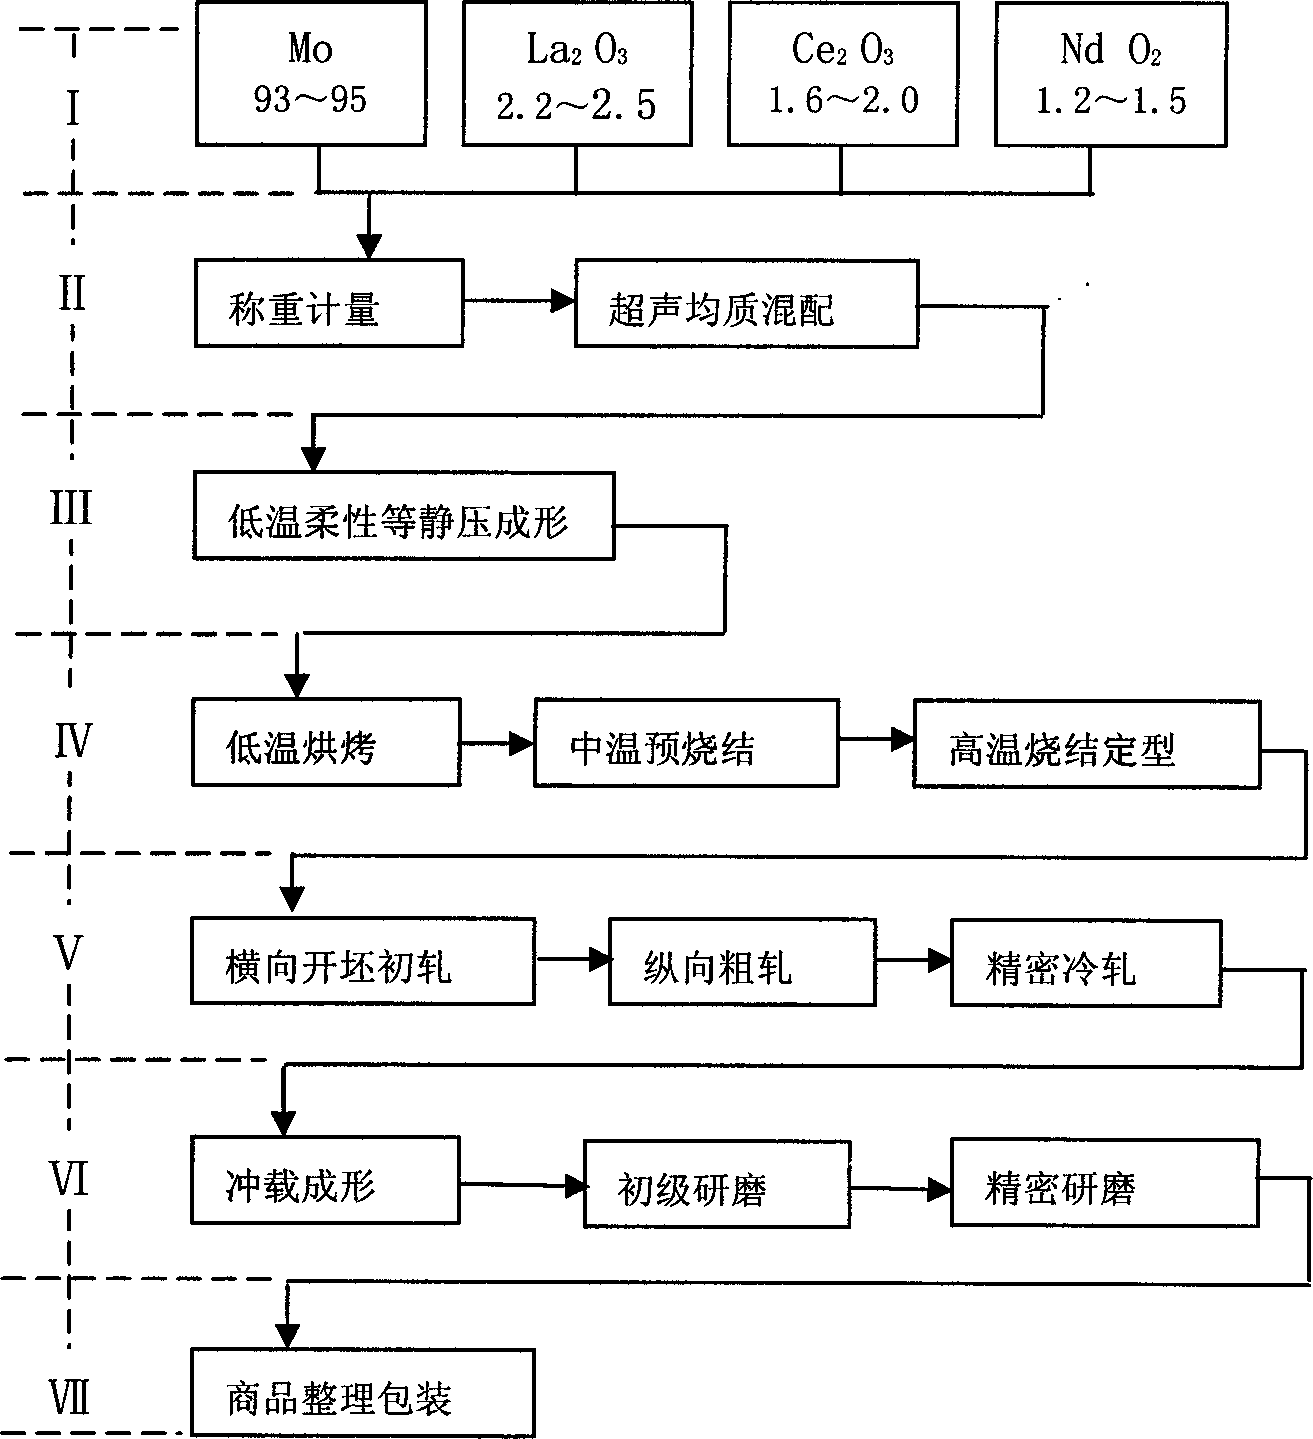 Molybdenum-based rare earth oxide powder metallurgical alloy wafer and preparing method thereof